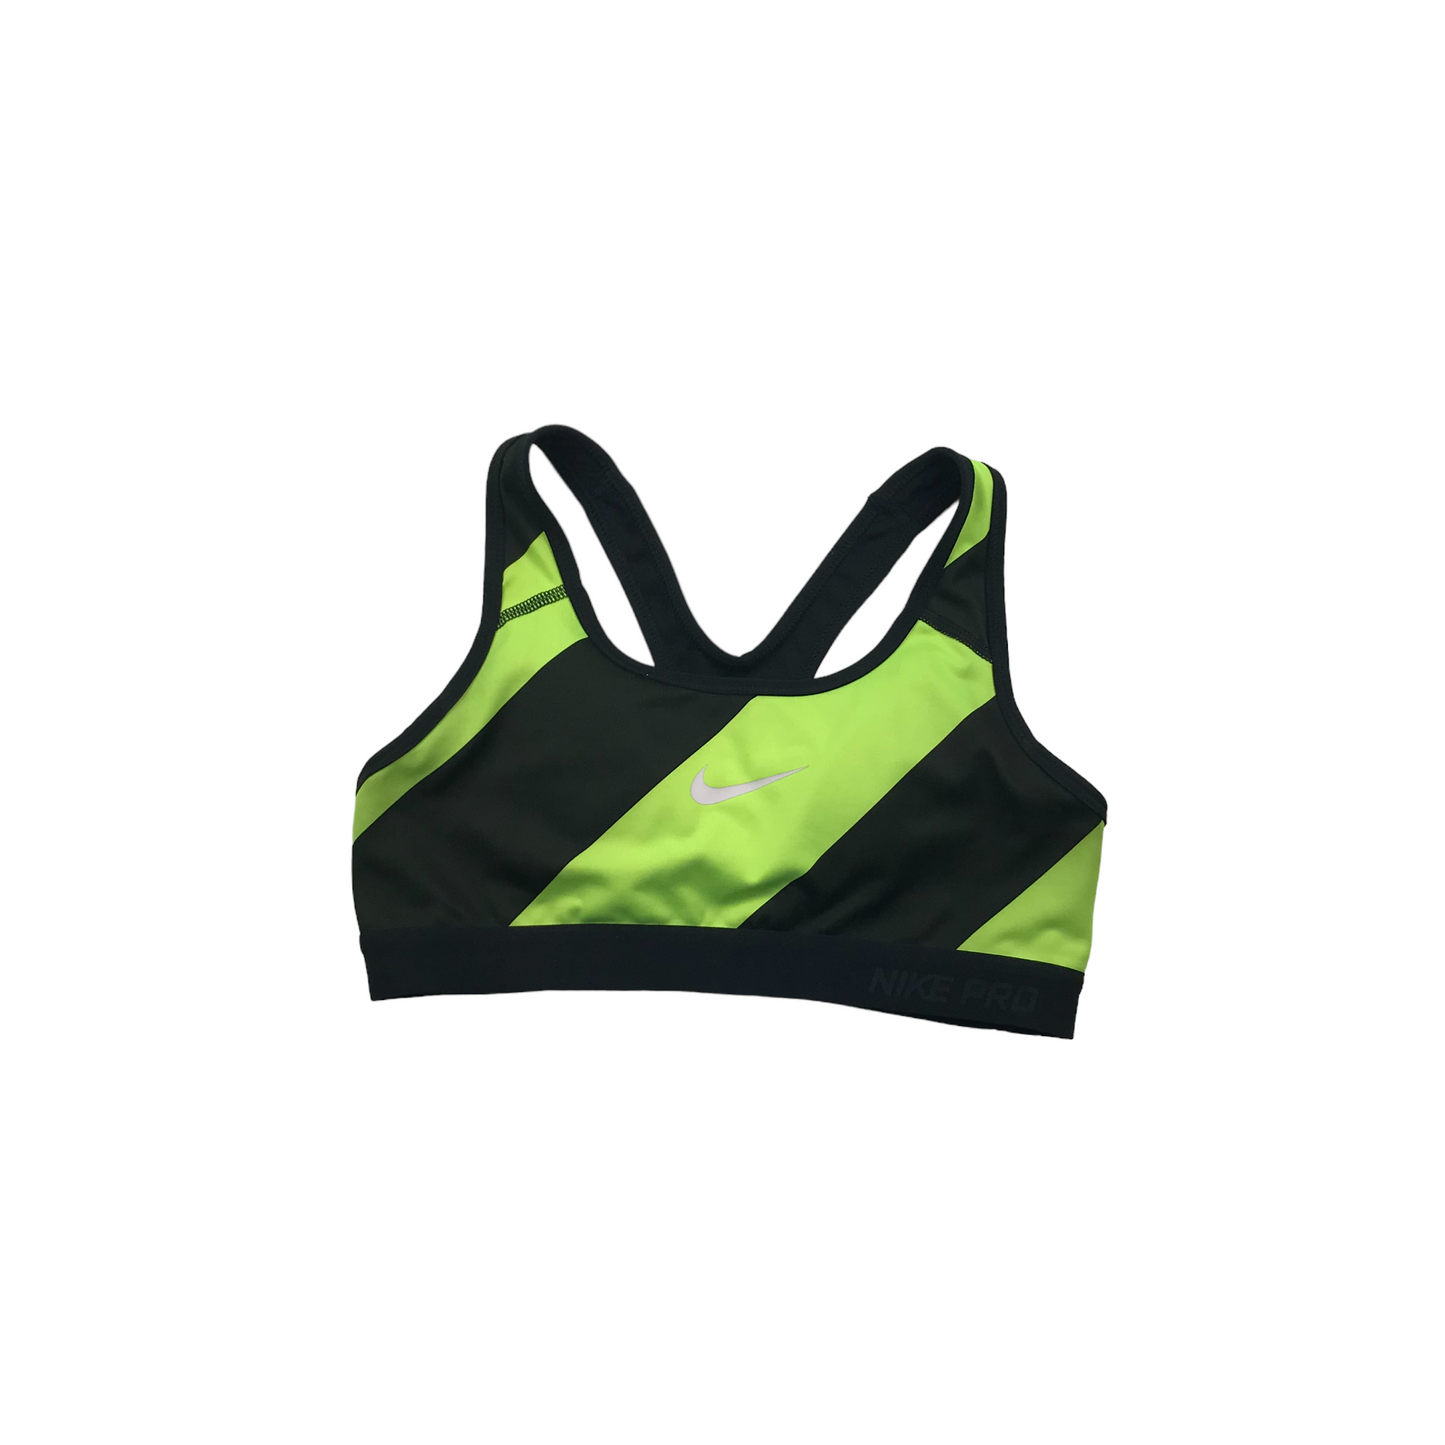 Nike Pro Black and Neon Padded Sports Crop Top Women's Size S